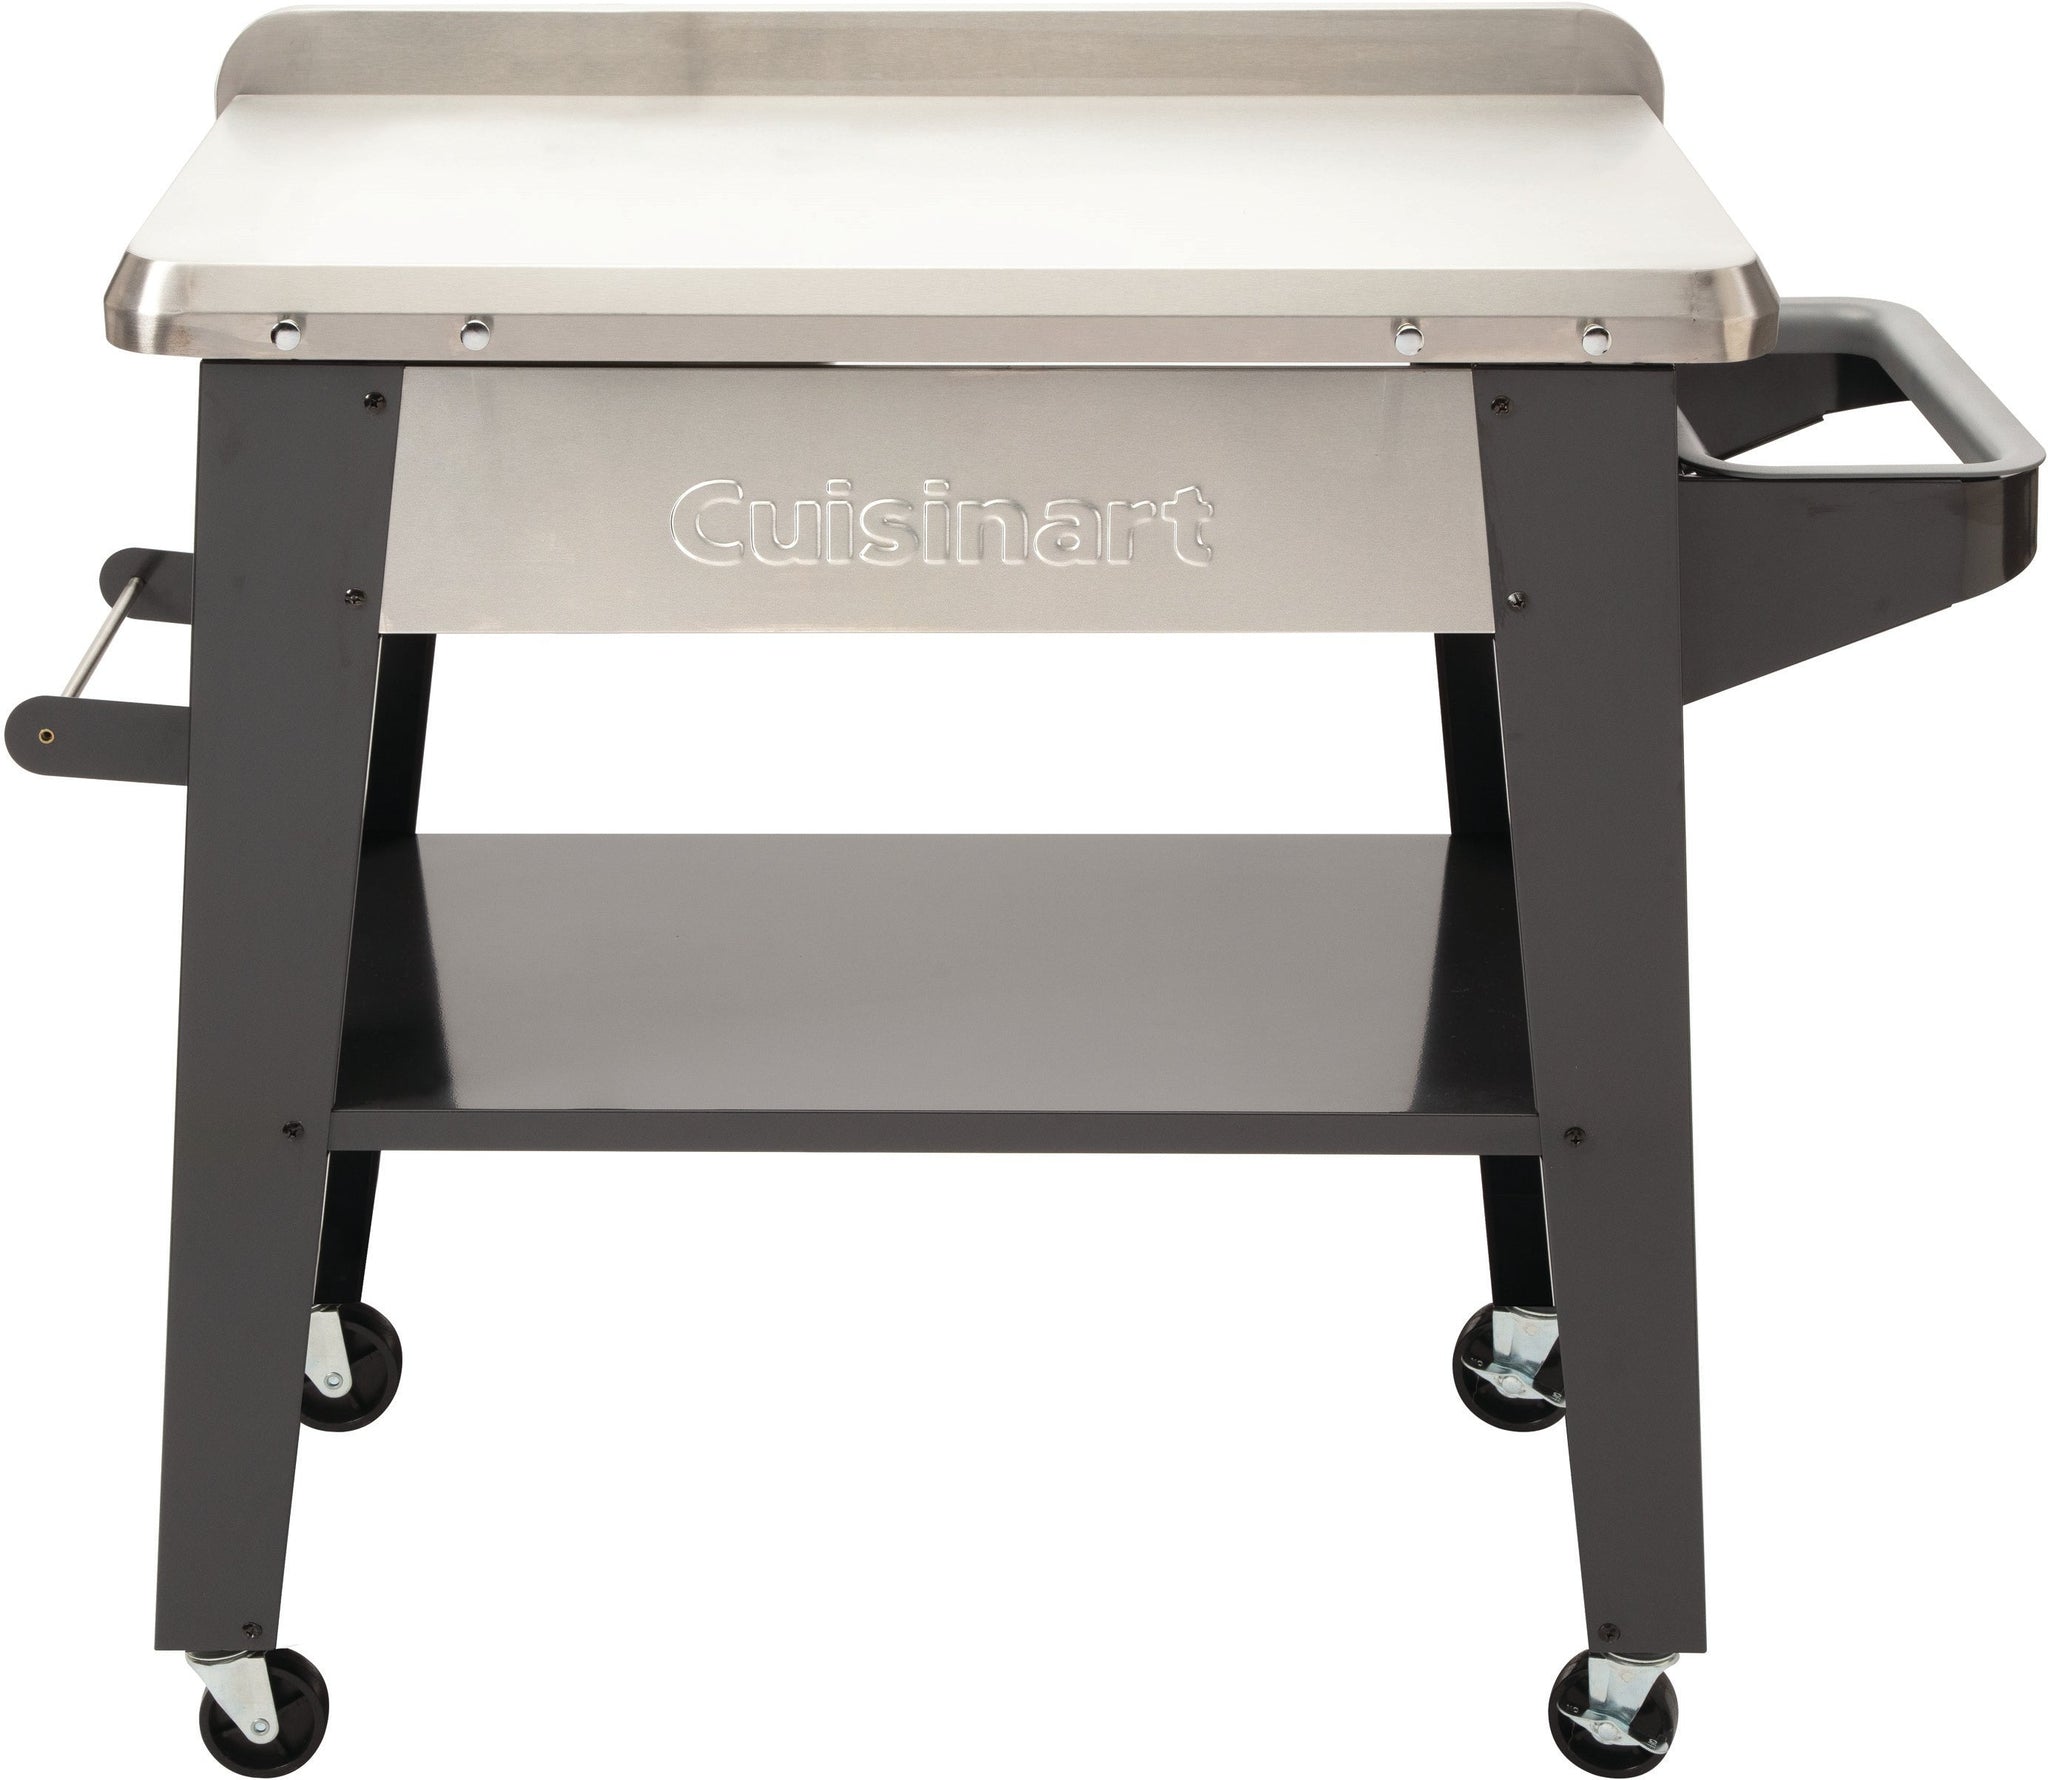 Cuisinart - 36" x 22" Stainless Steel Outdoor Prep Table - CPT-194-C